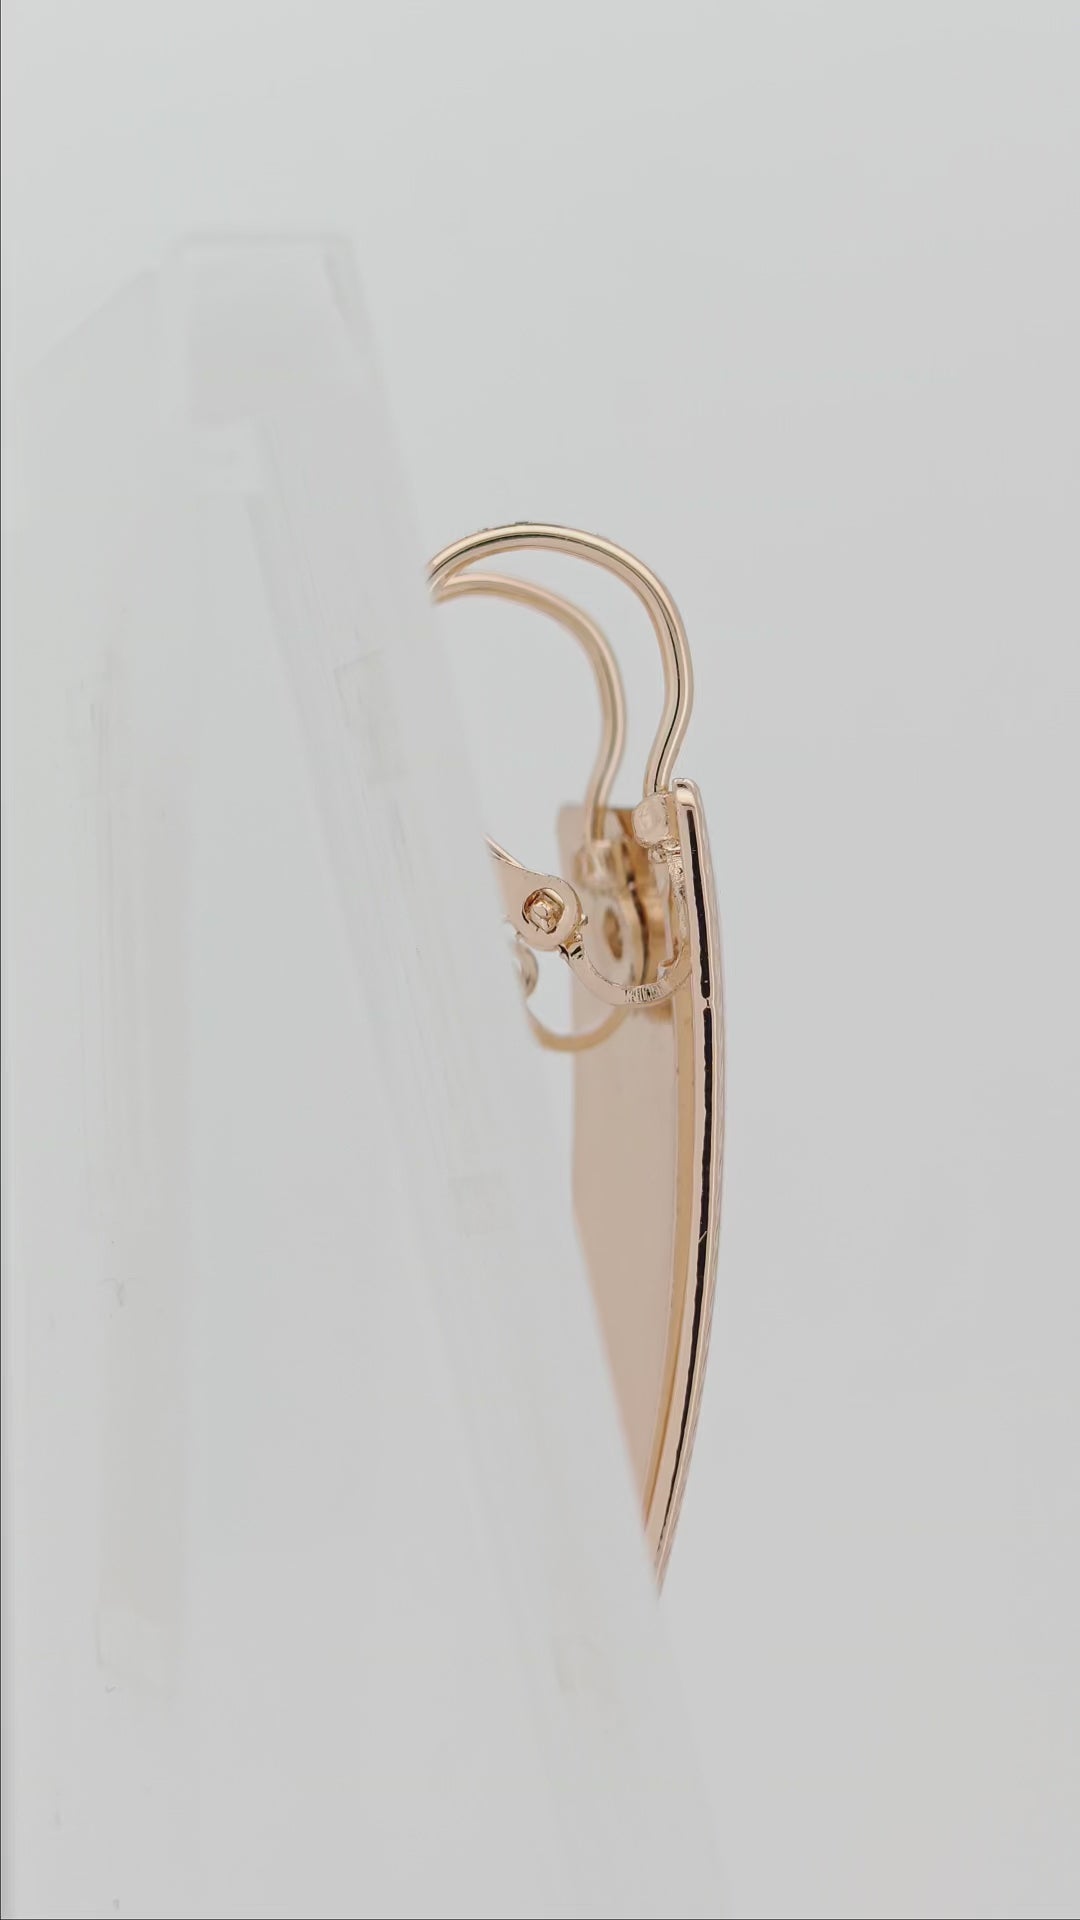 .Wire hook flat square earrings plated in 14K Gold, Rose Gold